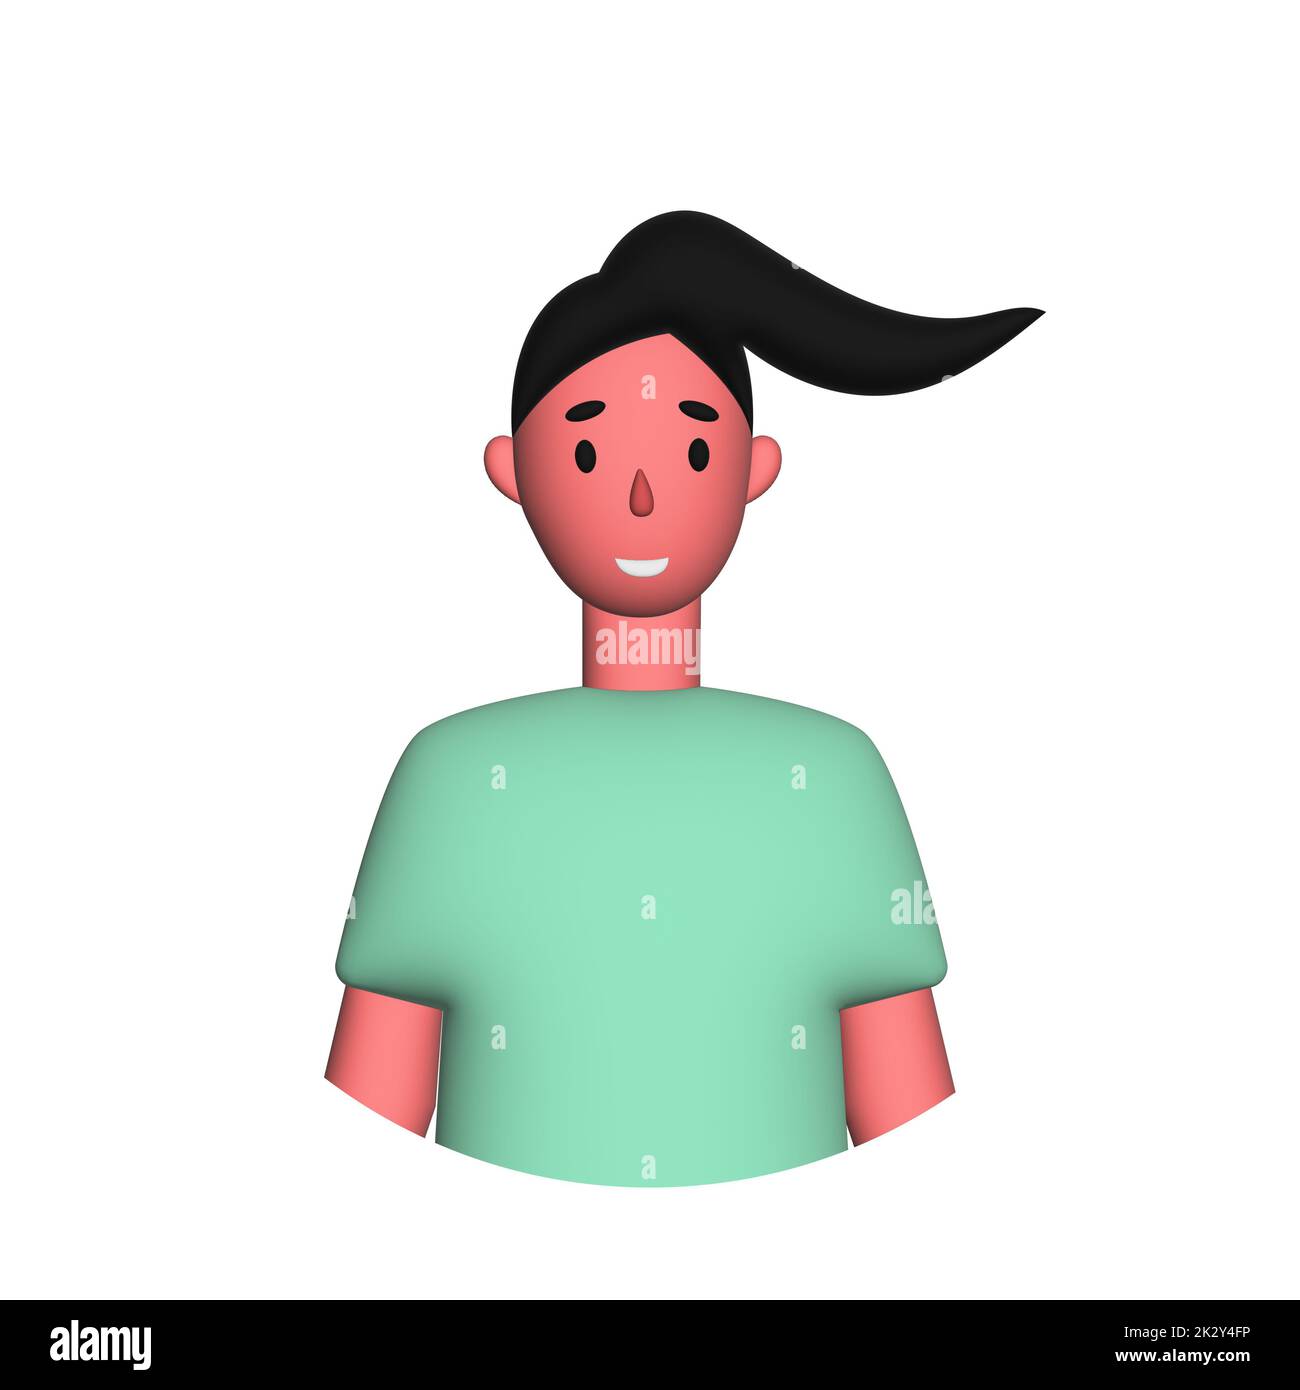 Web icon man, girl with a pigtail Stock Photo